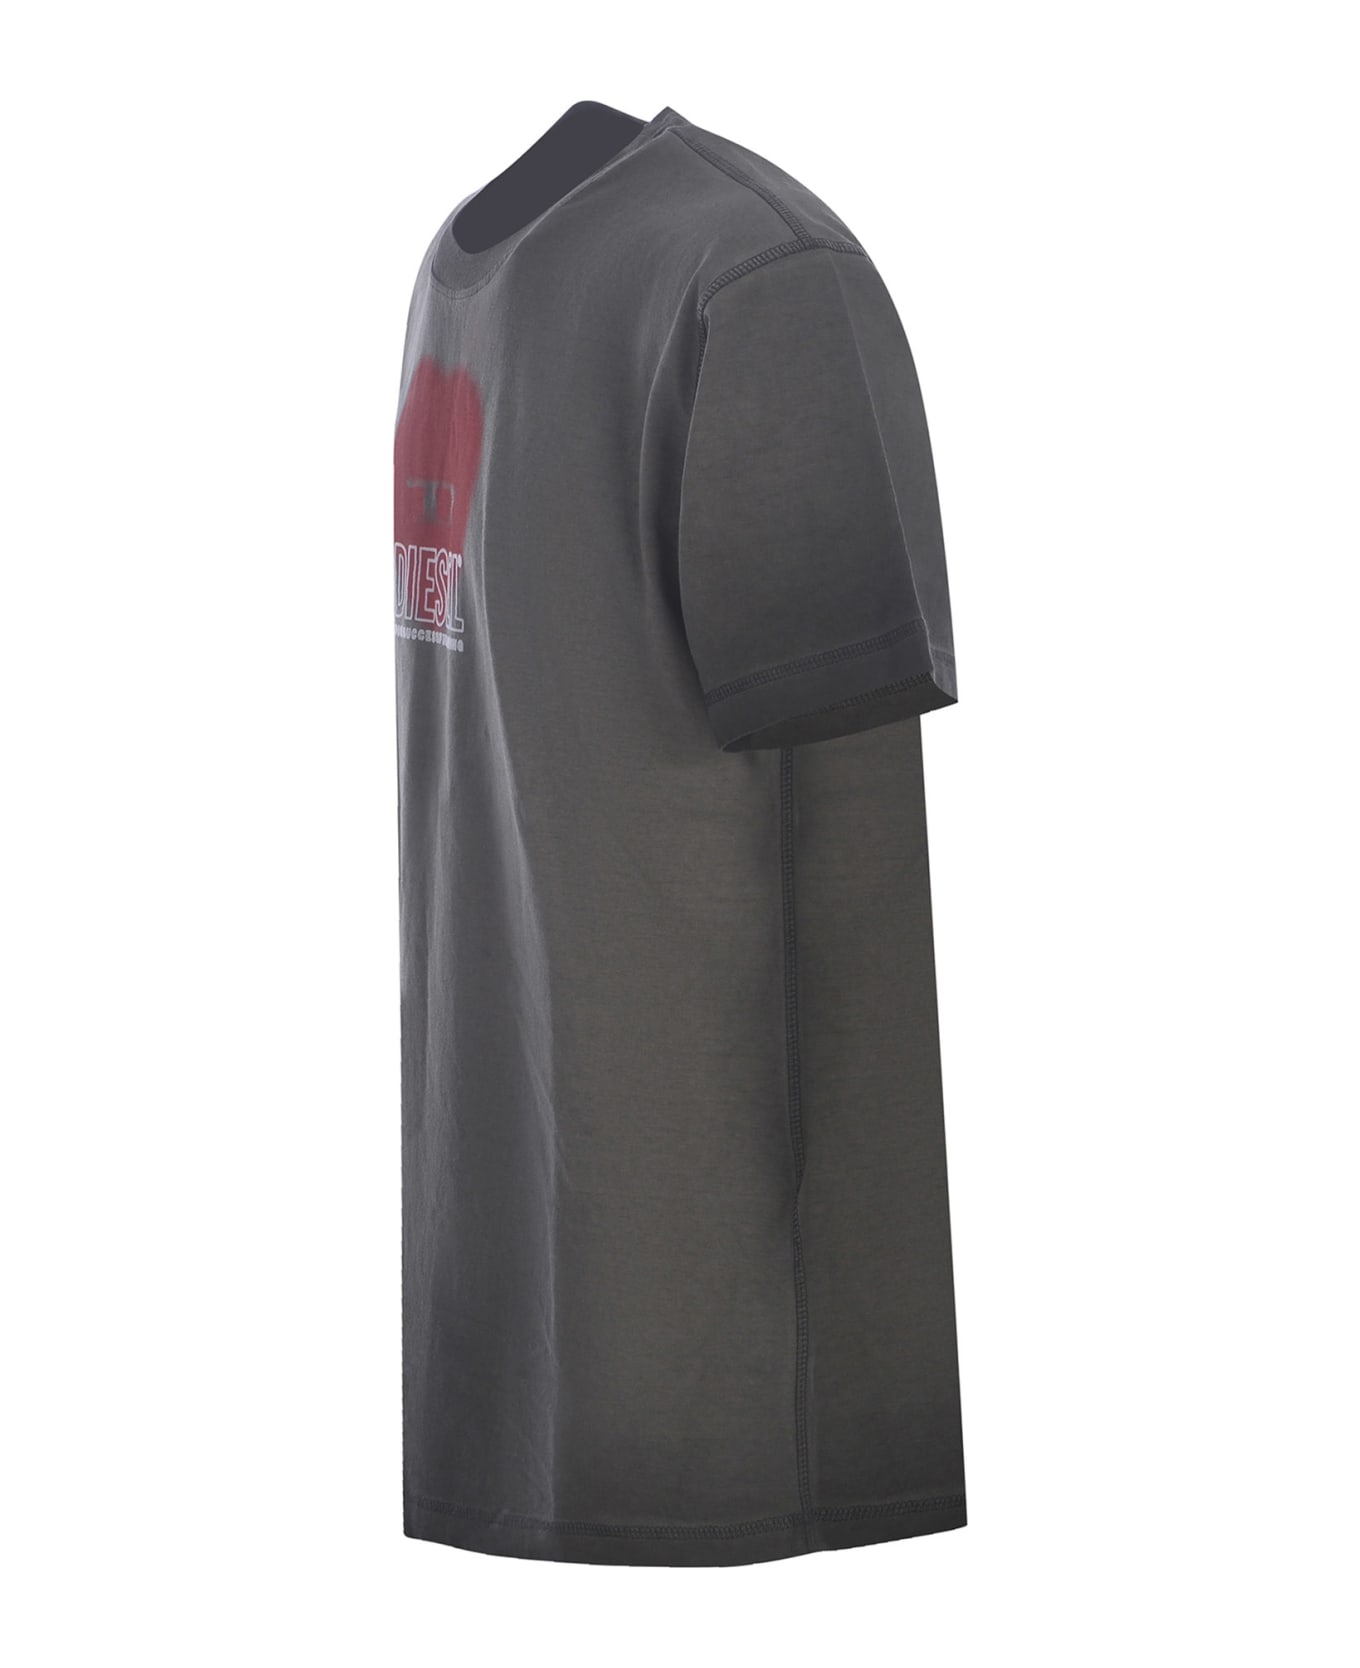 Diesel T-shirt "t-buxt-n4" Made Of Jersey Cotton - Grigio antracite